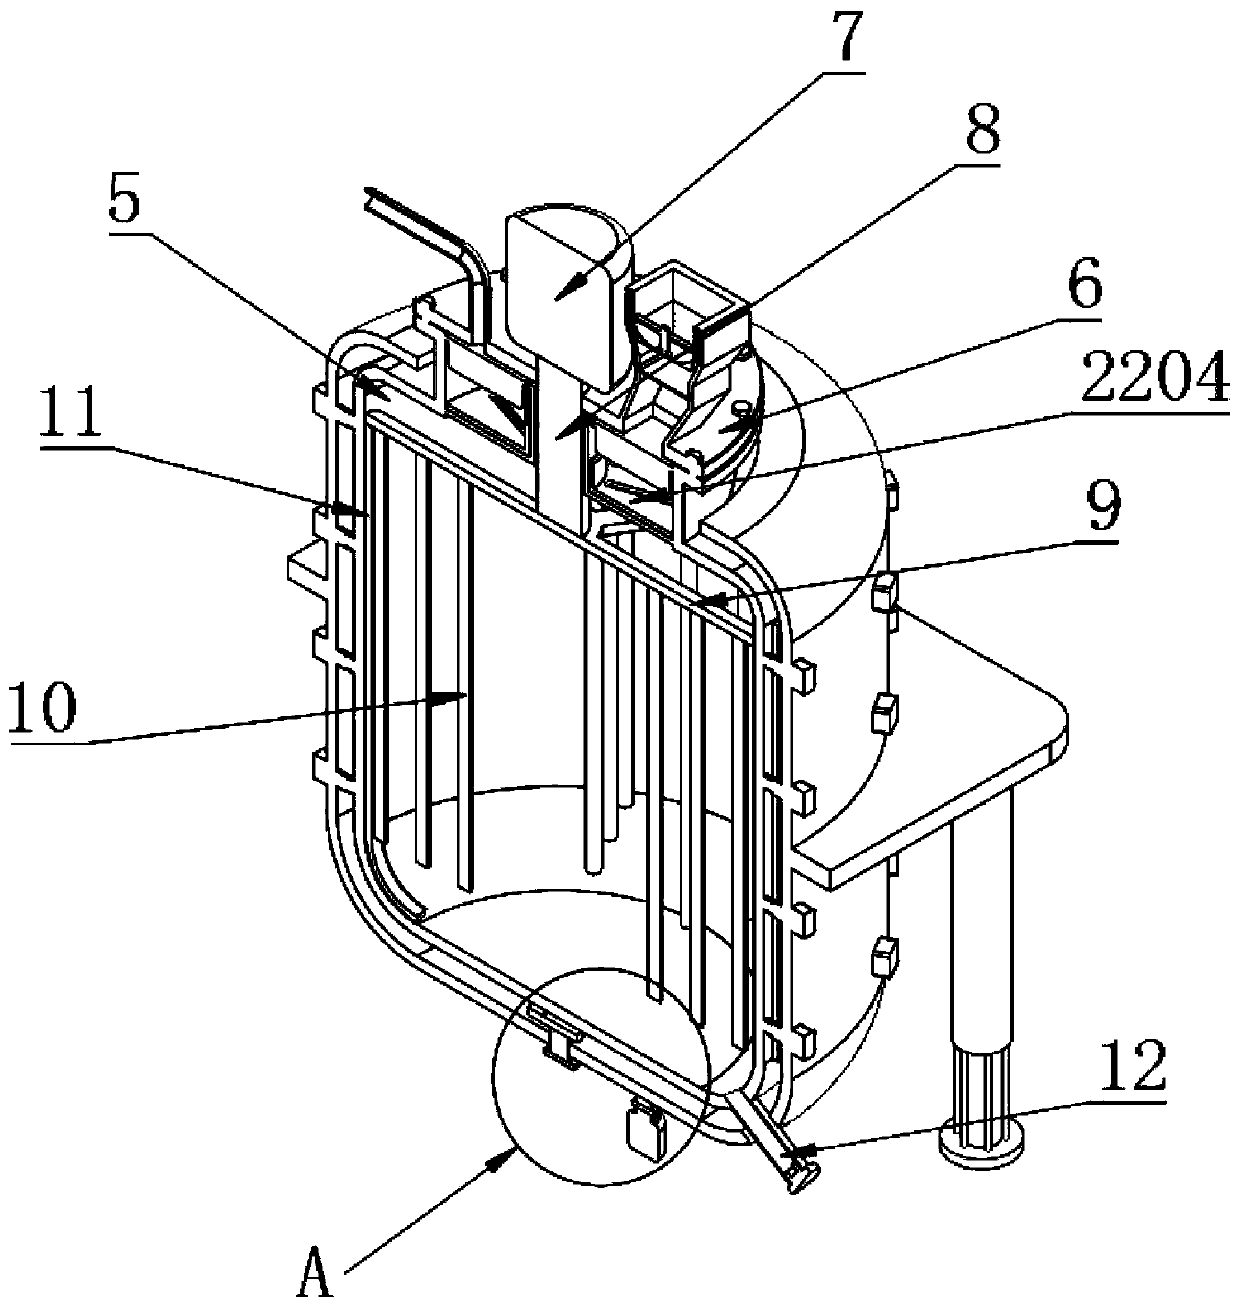 Batching device for sewage treatment system